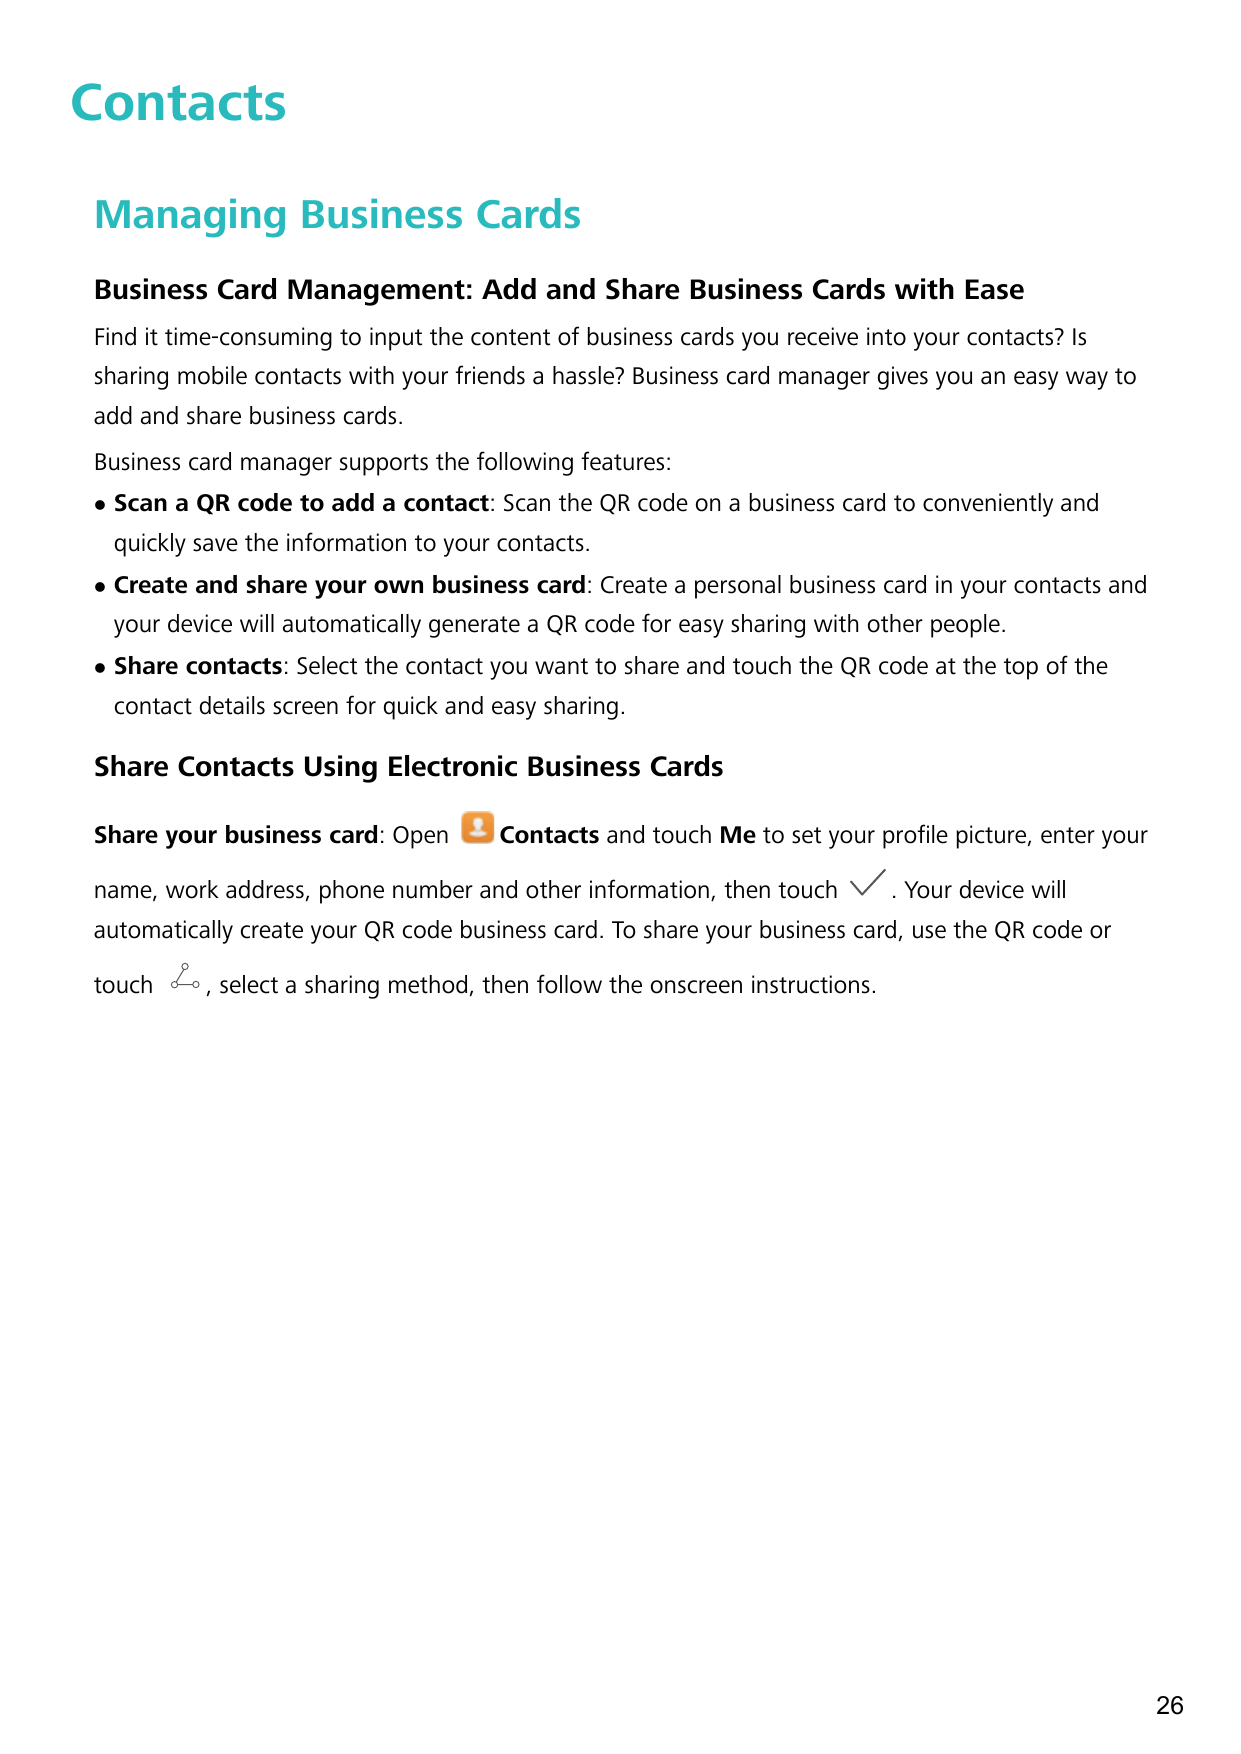 ContactsManaging Business CardsBusiness Card Management: Add and Share Business Cards with EaseFind it time-consuming to input t